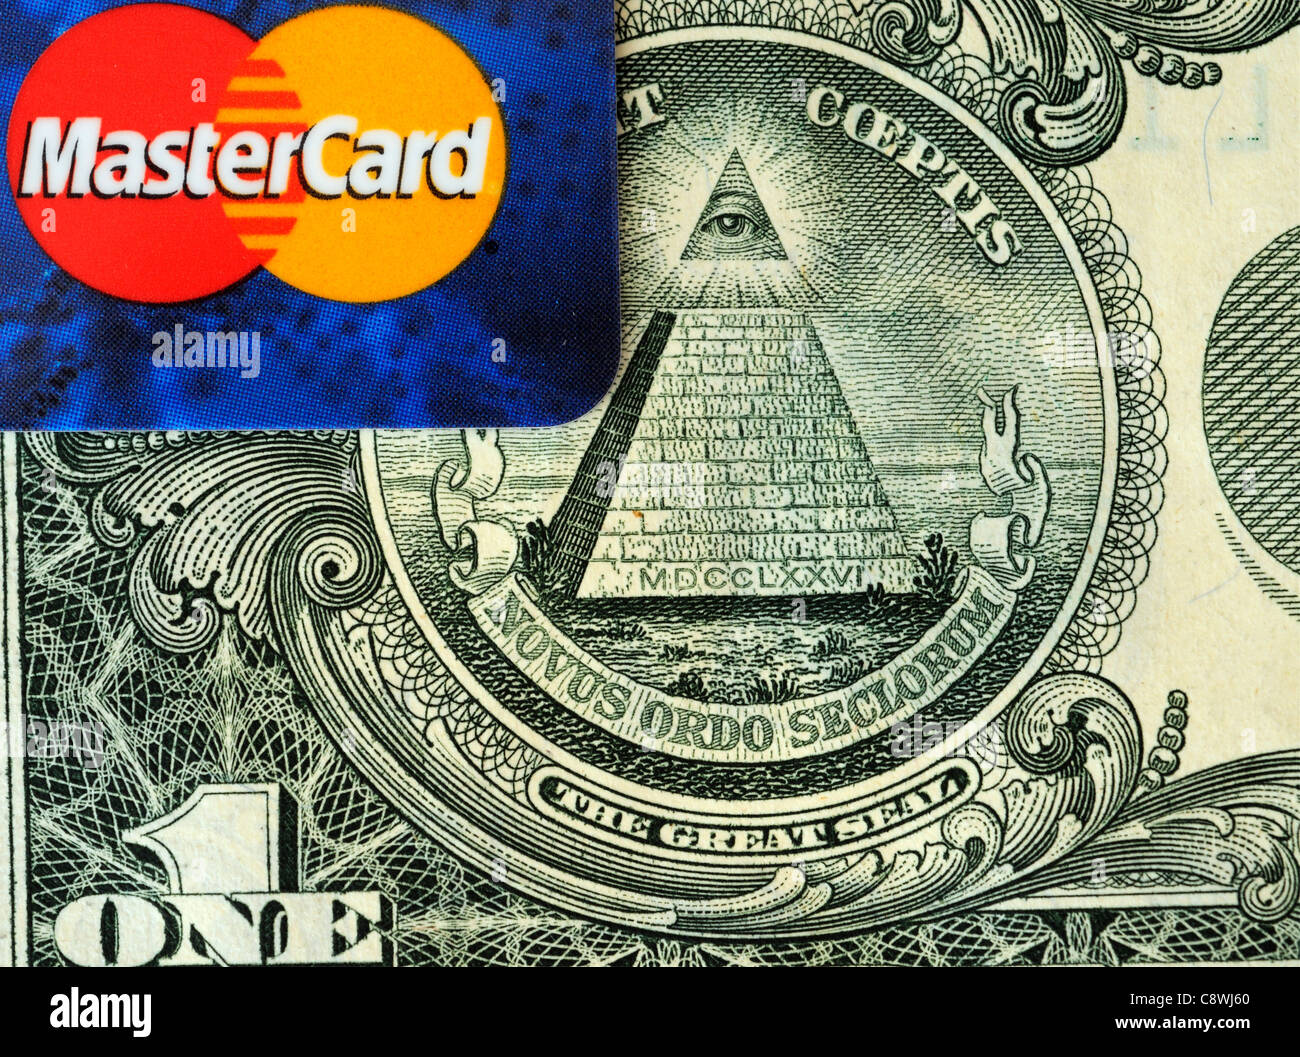 Mastercard and the pyramid on the american dollar bill Stock Photo